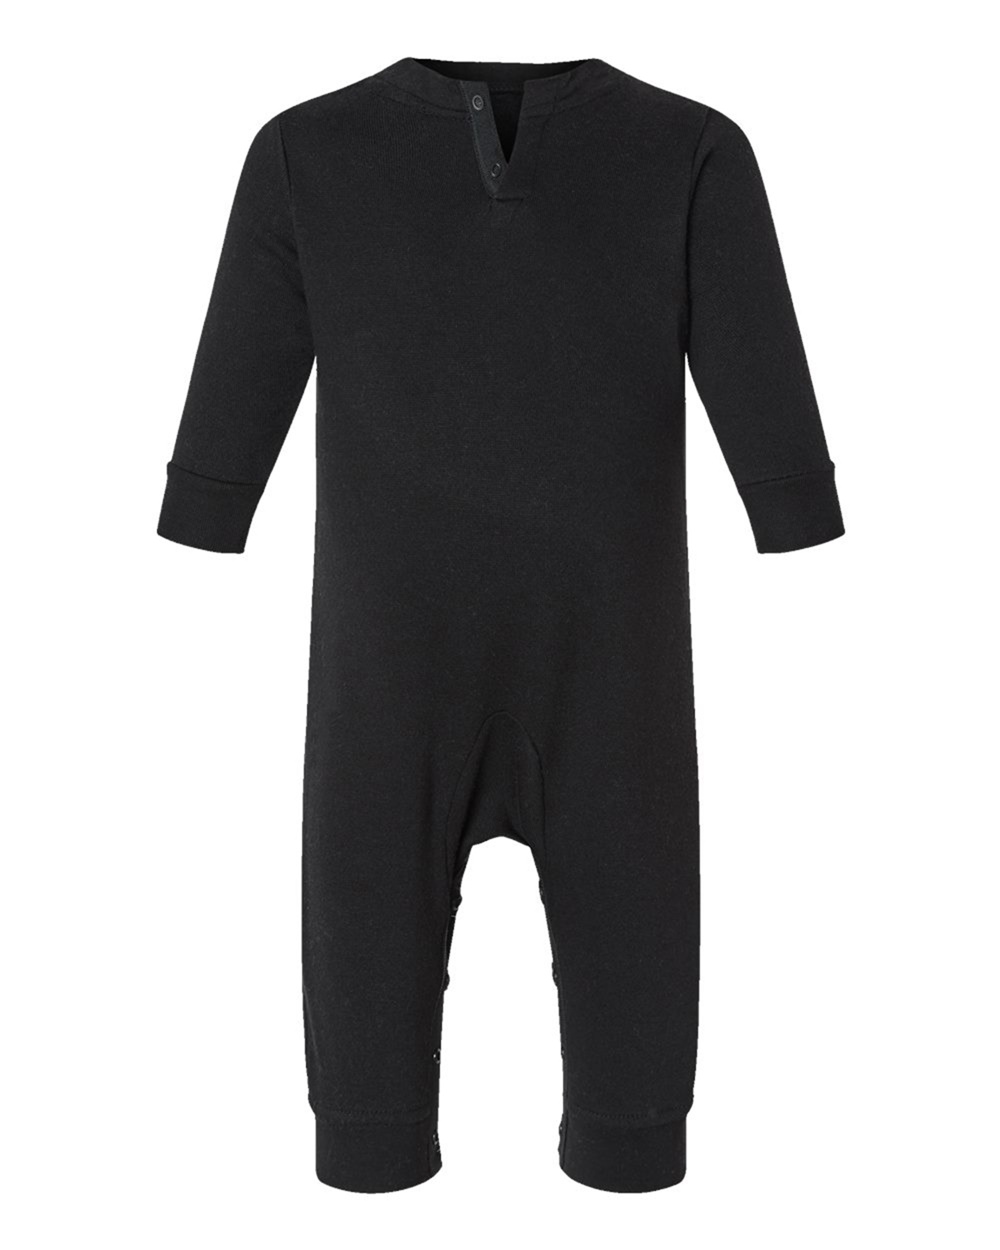 RS747 - Infant Fleece One Piece - One Stop